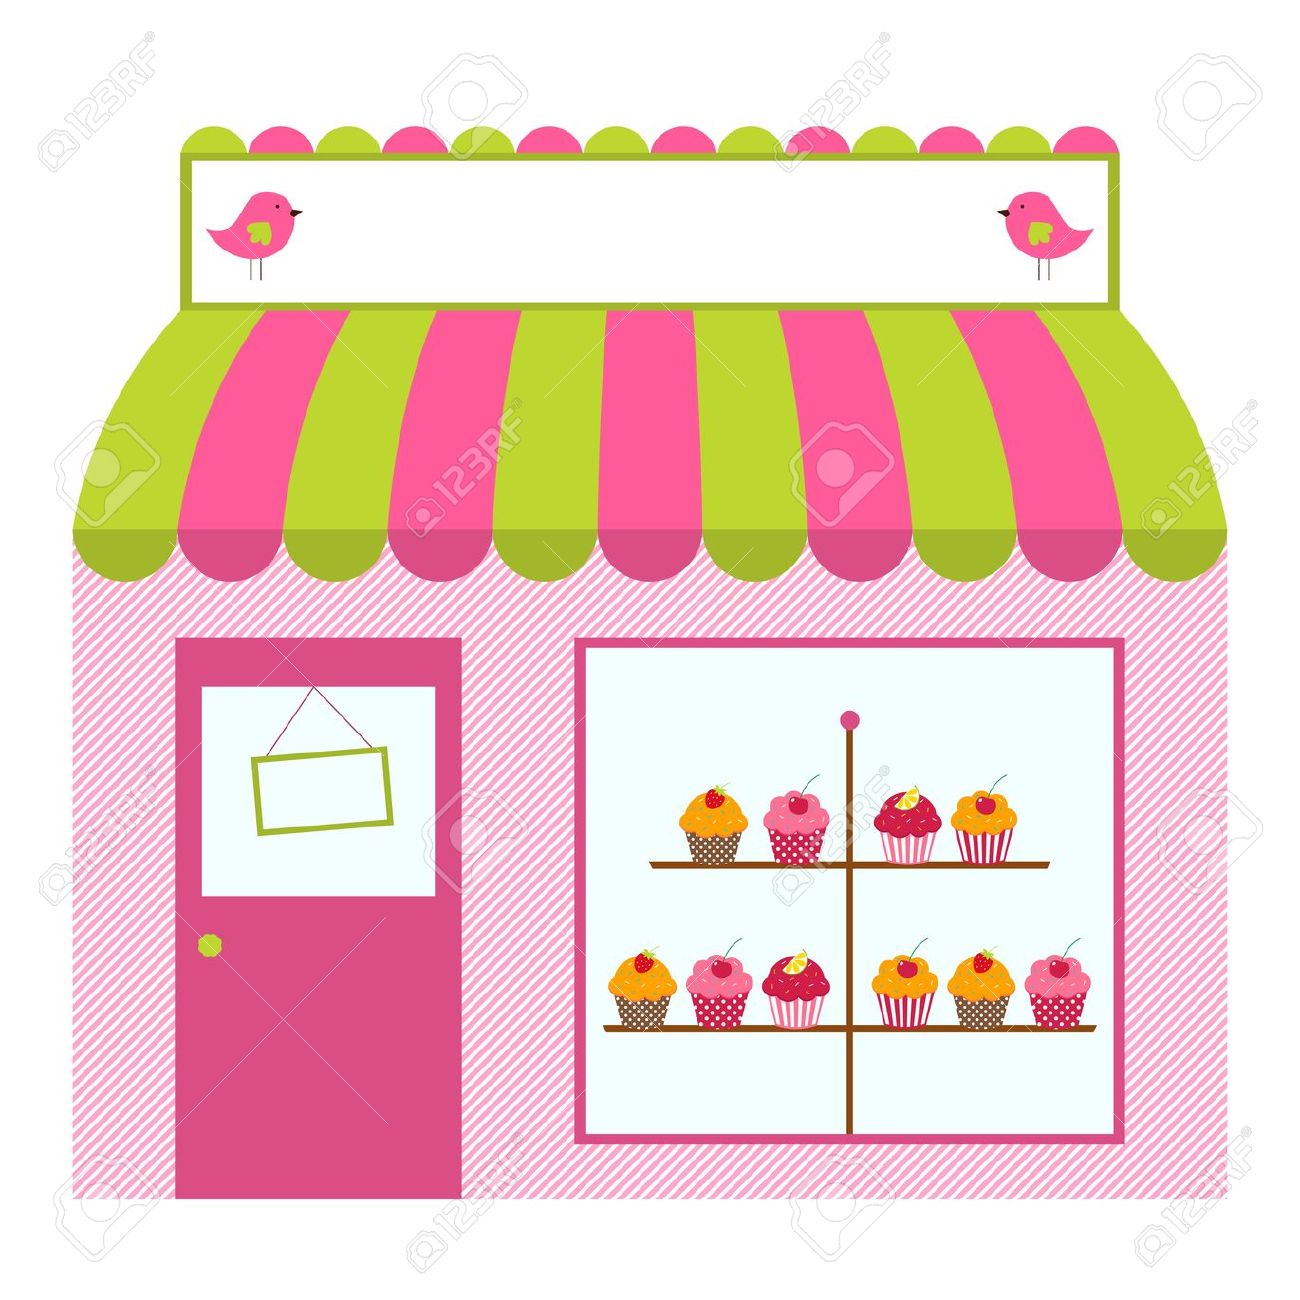 Pastry shops clipart - Clipground